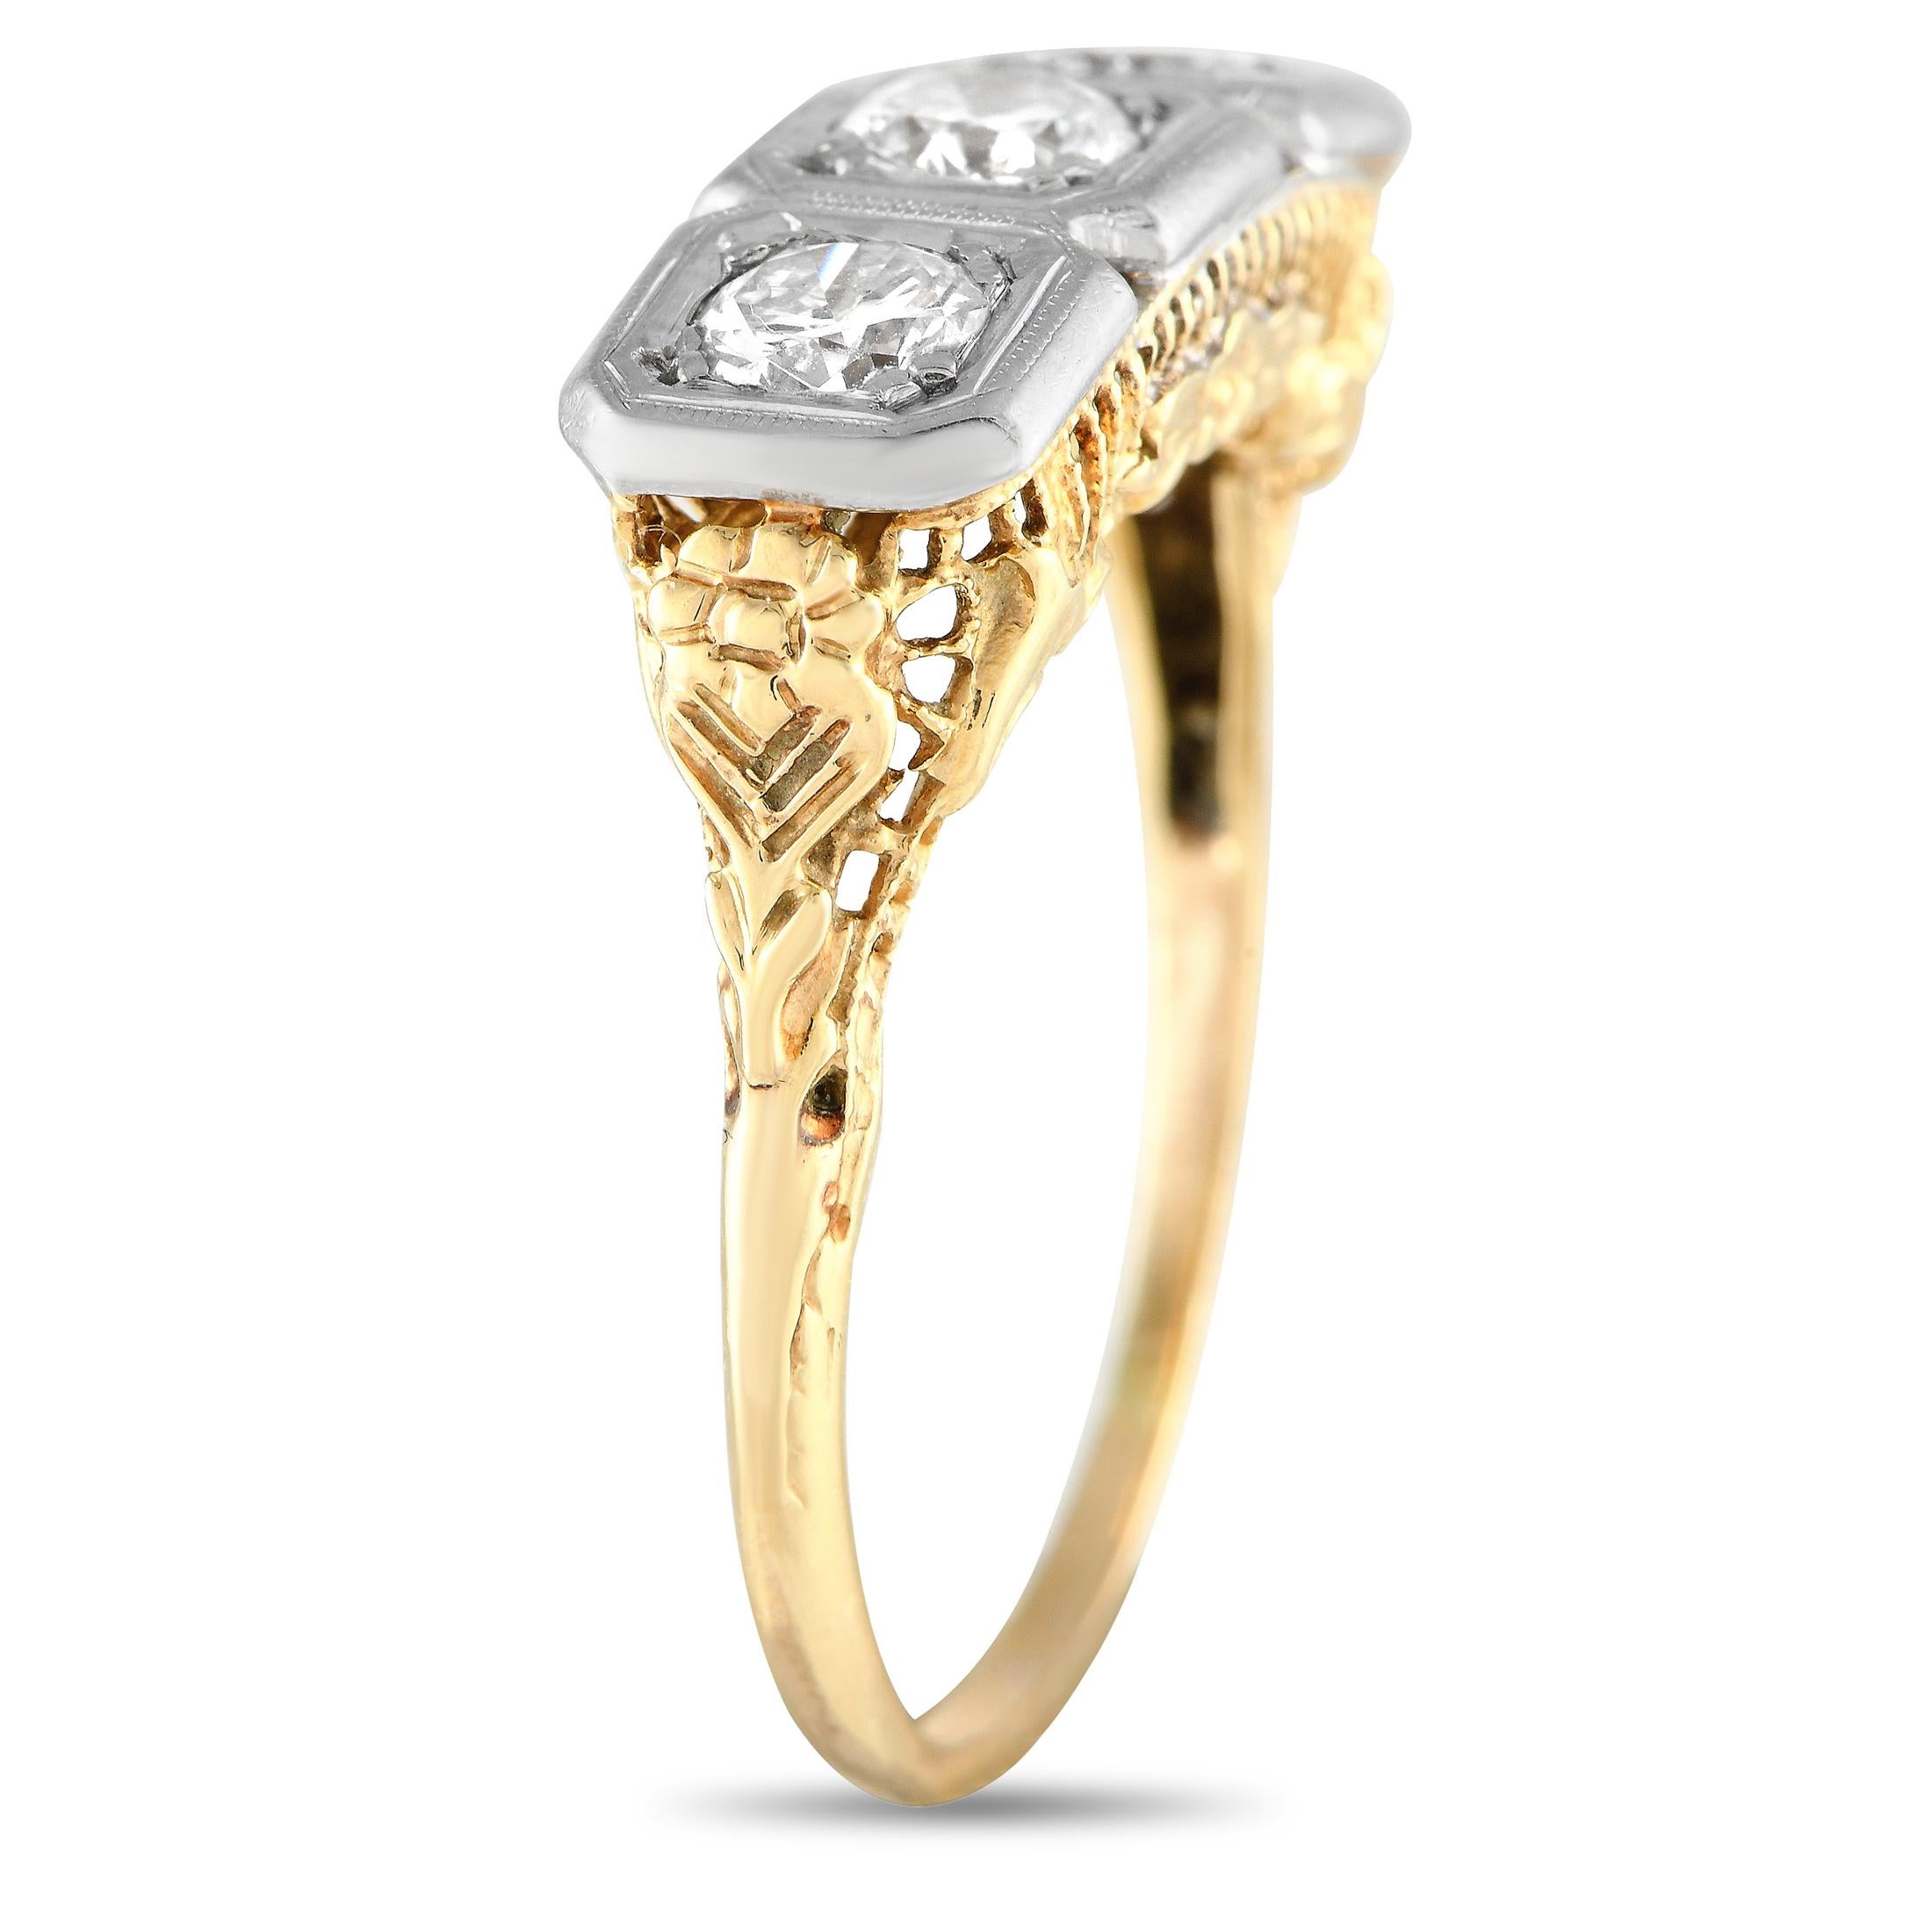 It's hard not to swoon over this alluring antique trilogy ring. It features a 14K yellow gold band with a delicate 1mm-thin shank and elaborately decorated shoulders. Sitting atop the intricate gallery are three round diamonds, each flush-set on a